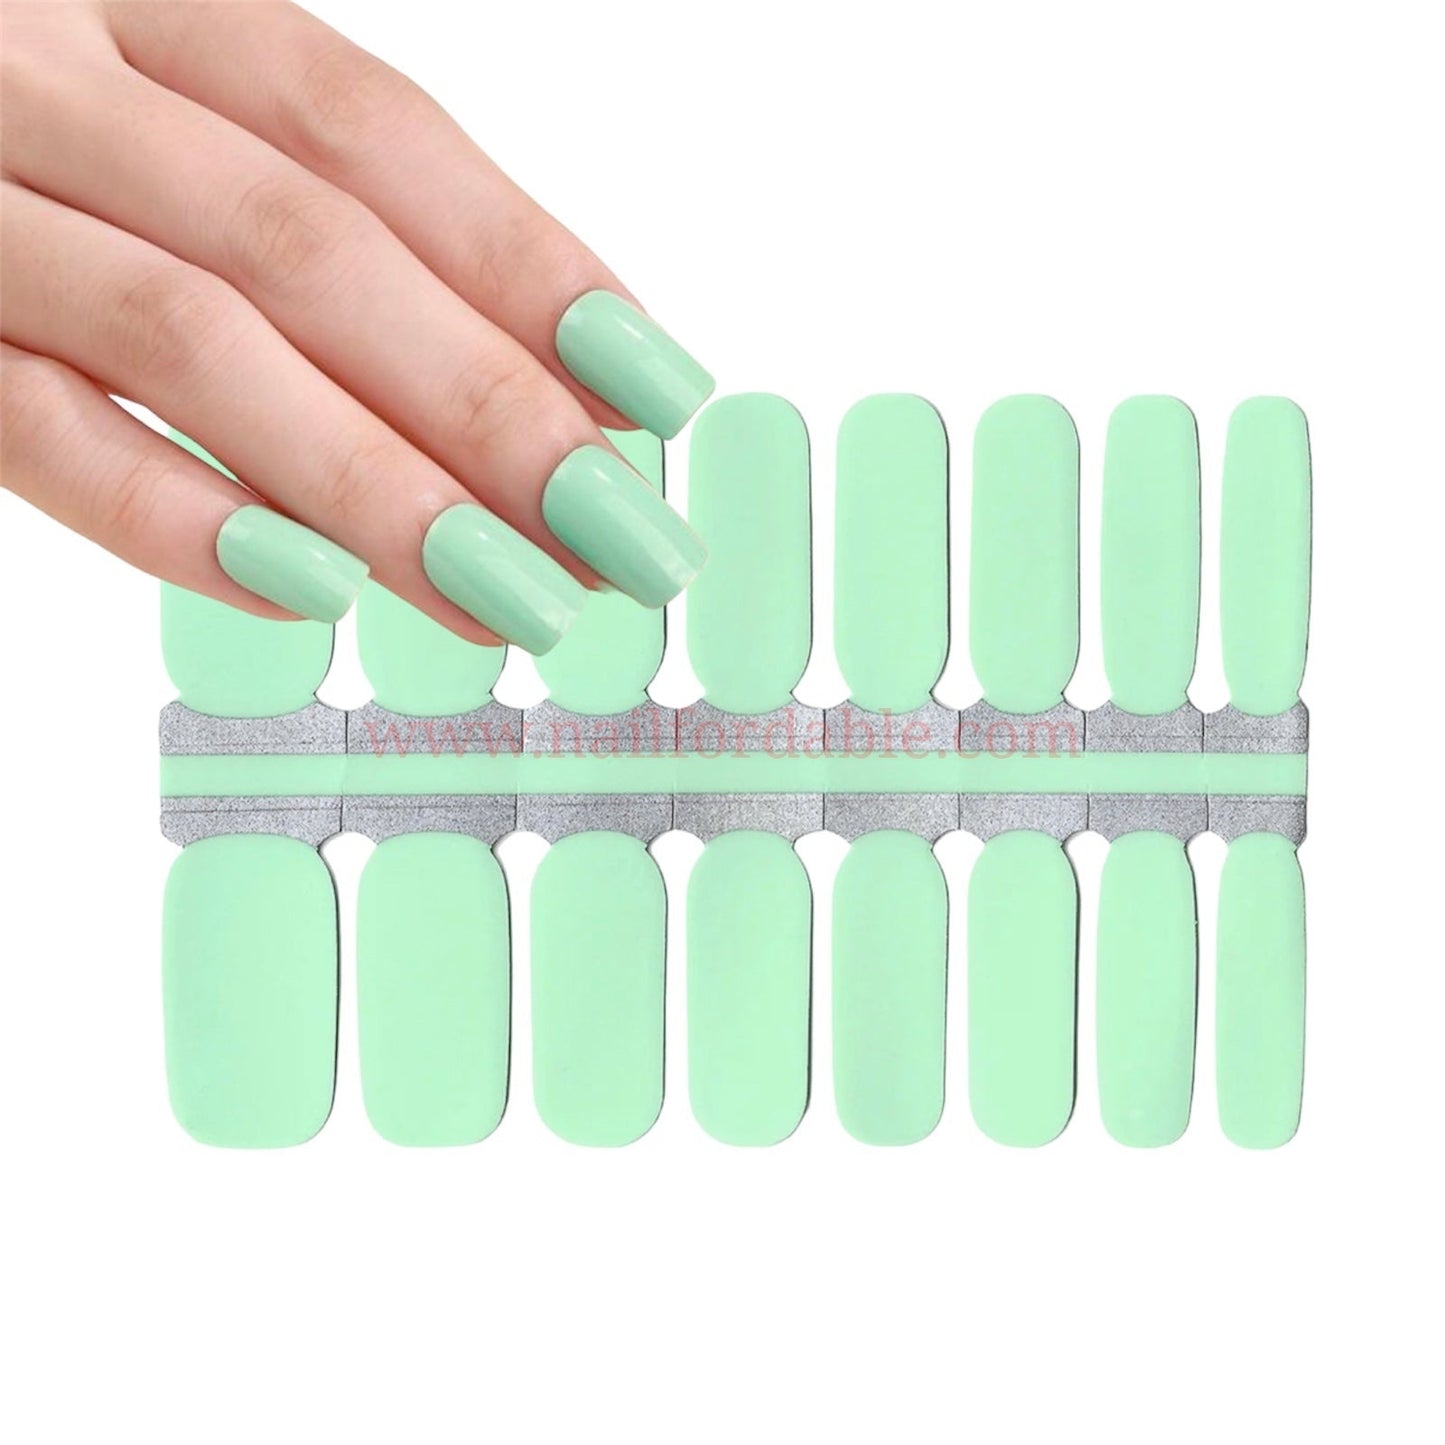 Mint green solid Nail Wraps | Semi Cured Gel Wraps | Gel Nail Wraps |Nail Polish | Nail Stickers